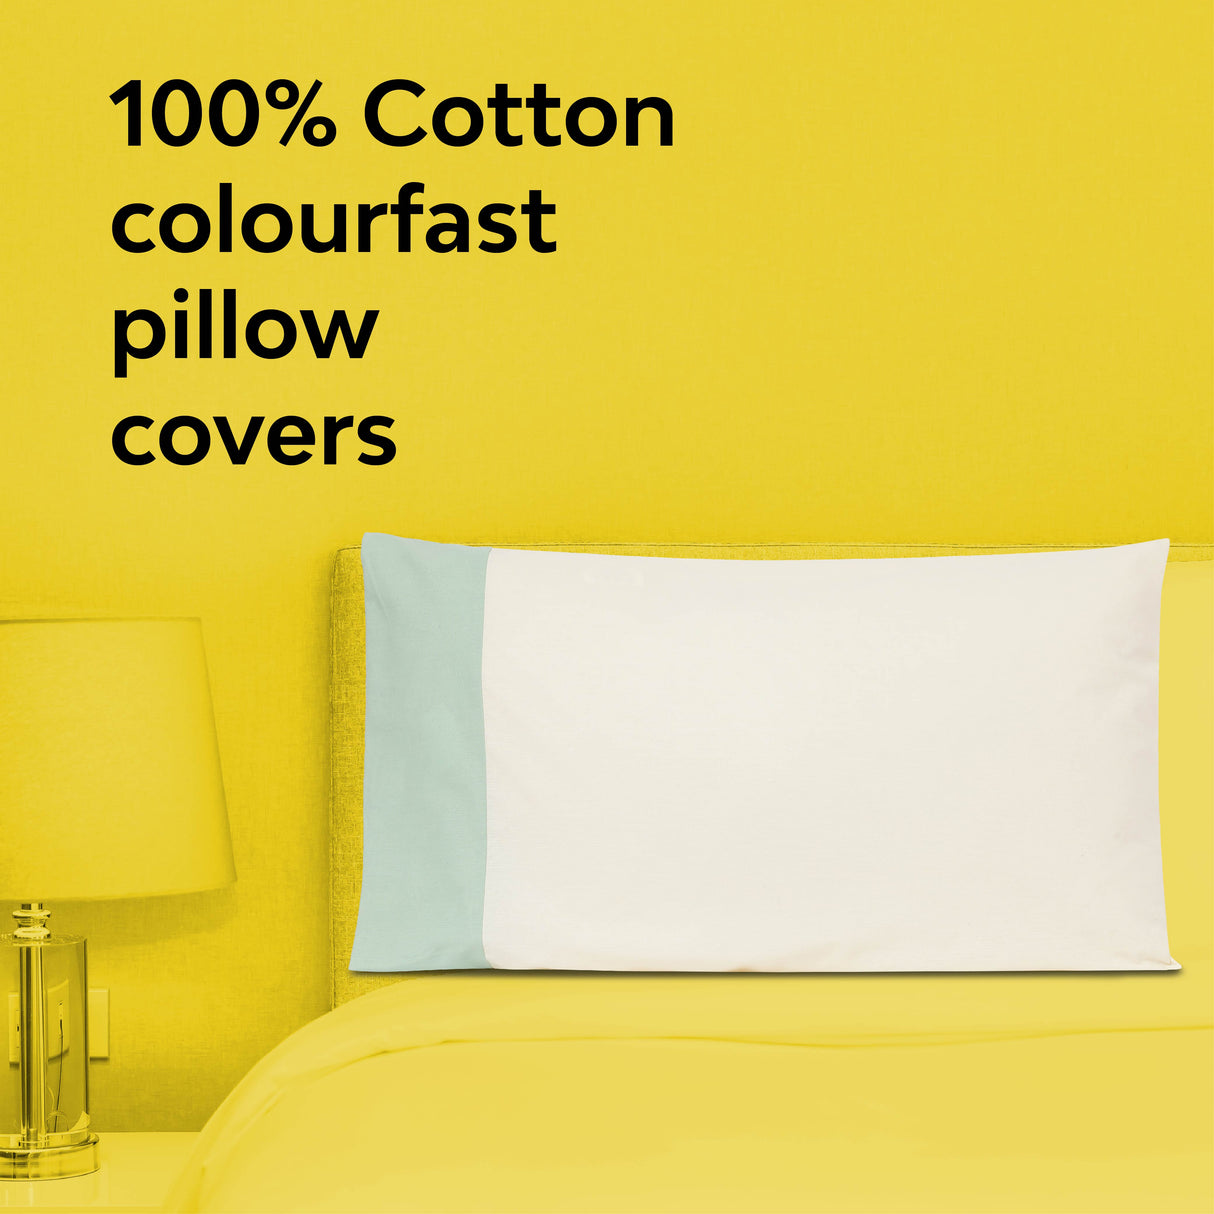 Colour fast pillow cover with green border